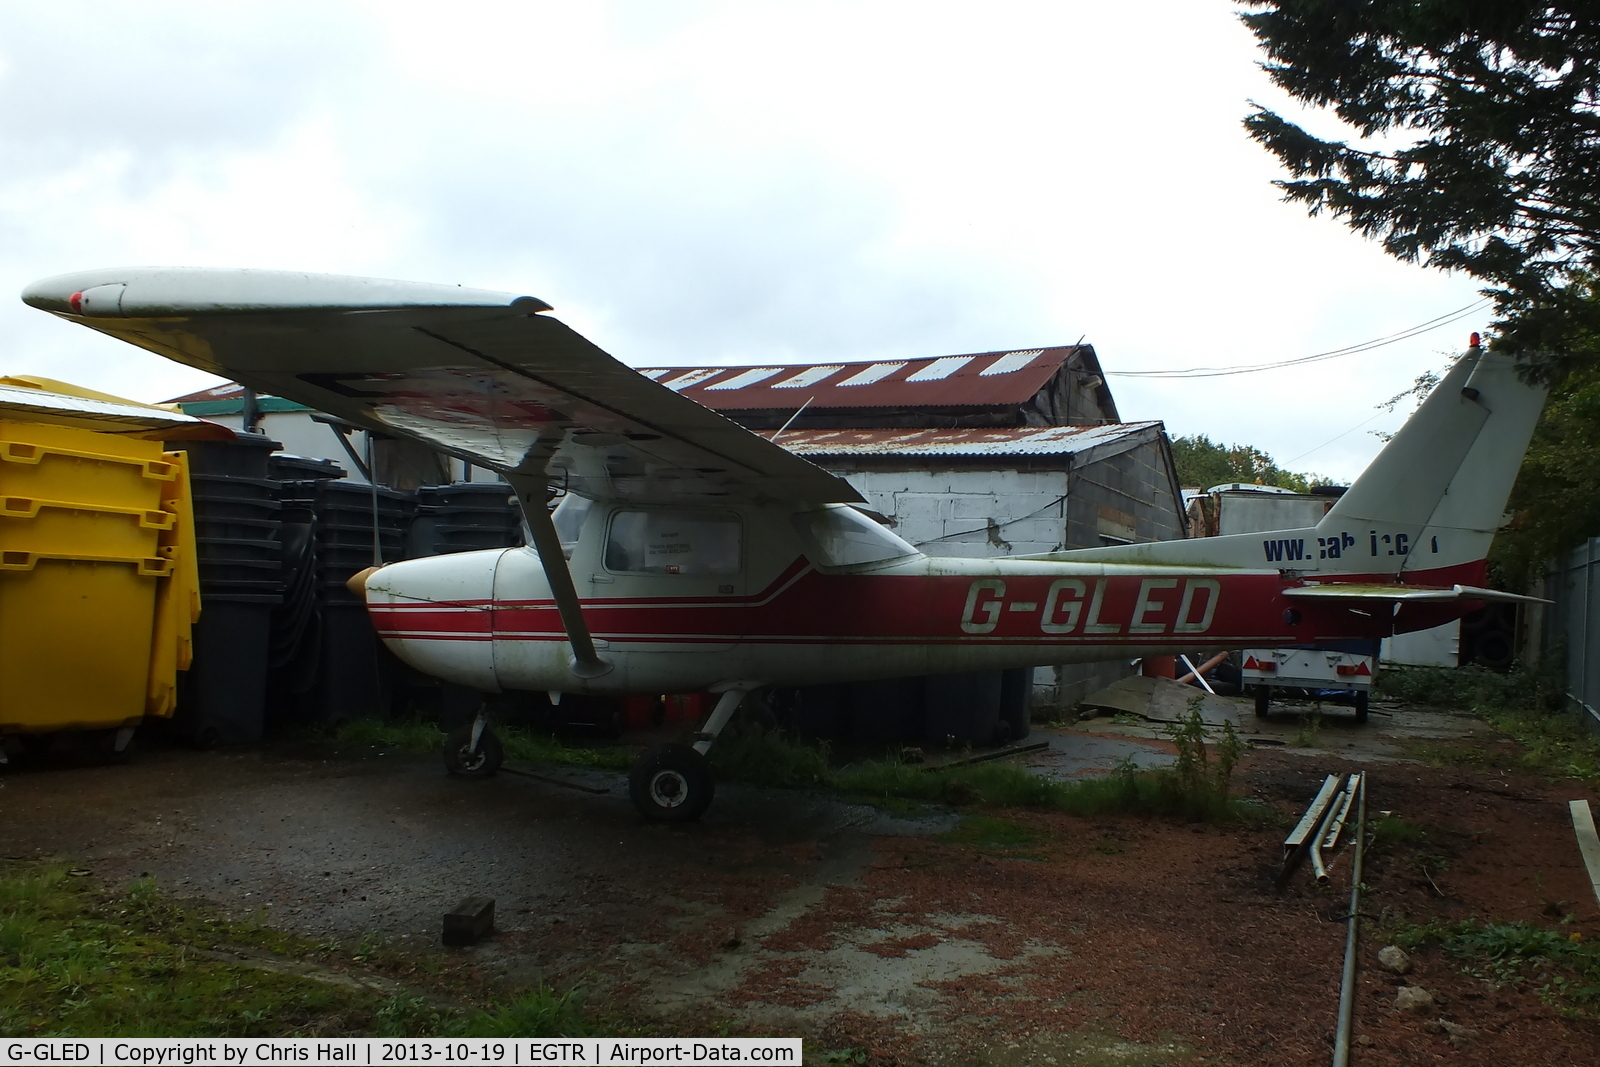 G-GLED, 1975 Cessna 150M C/N 150-76673, parked in the gap between two hangars